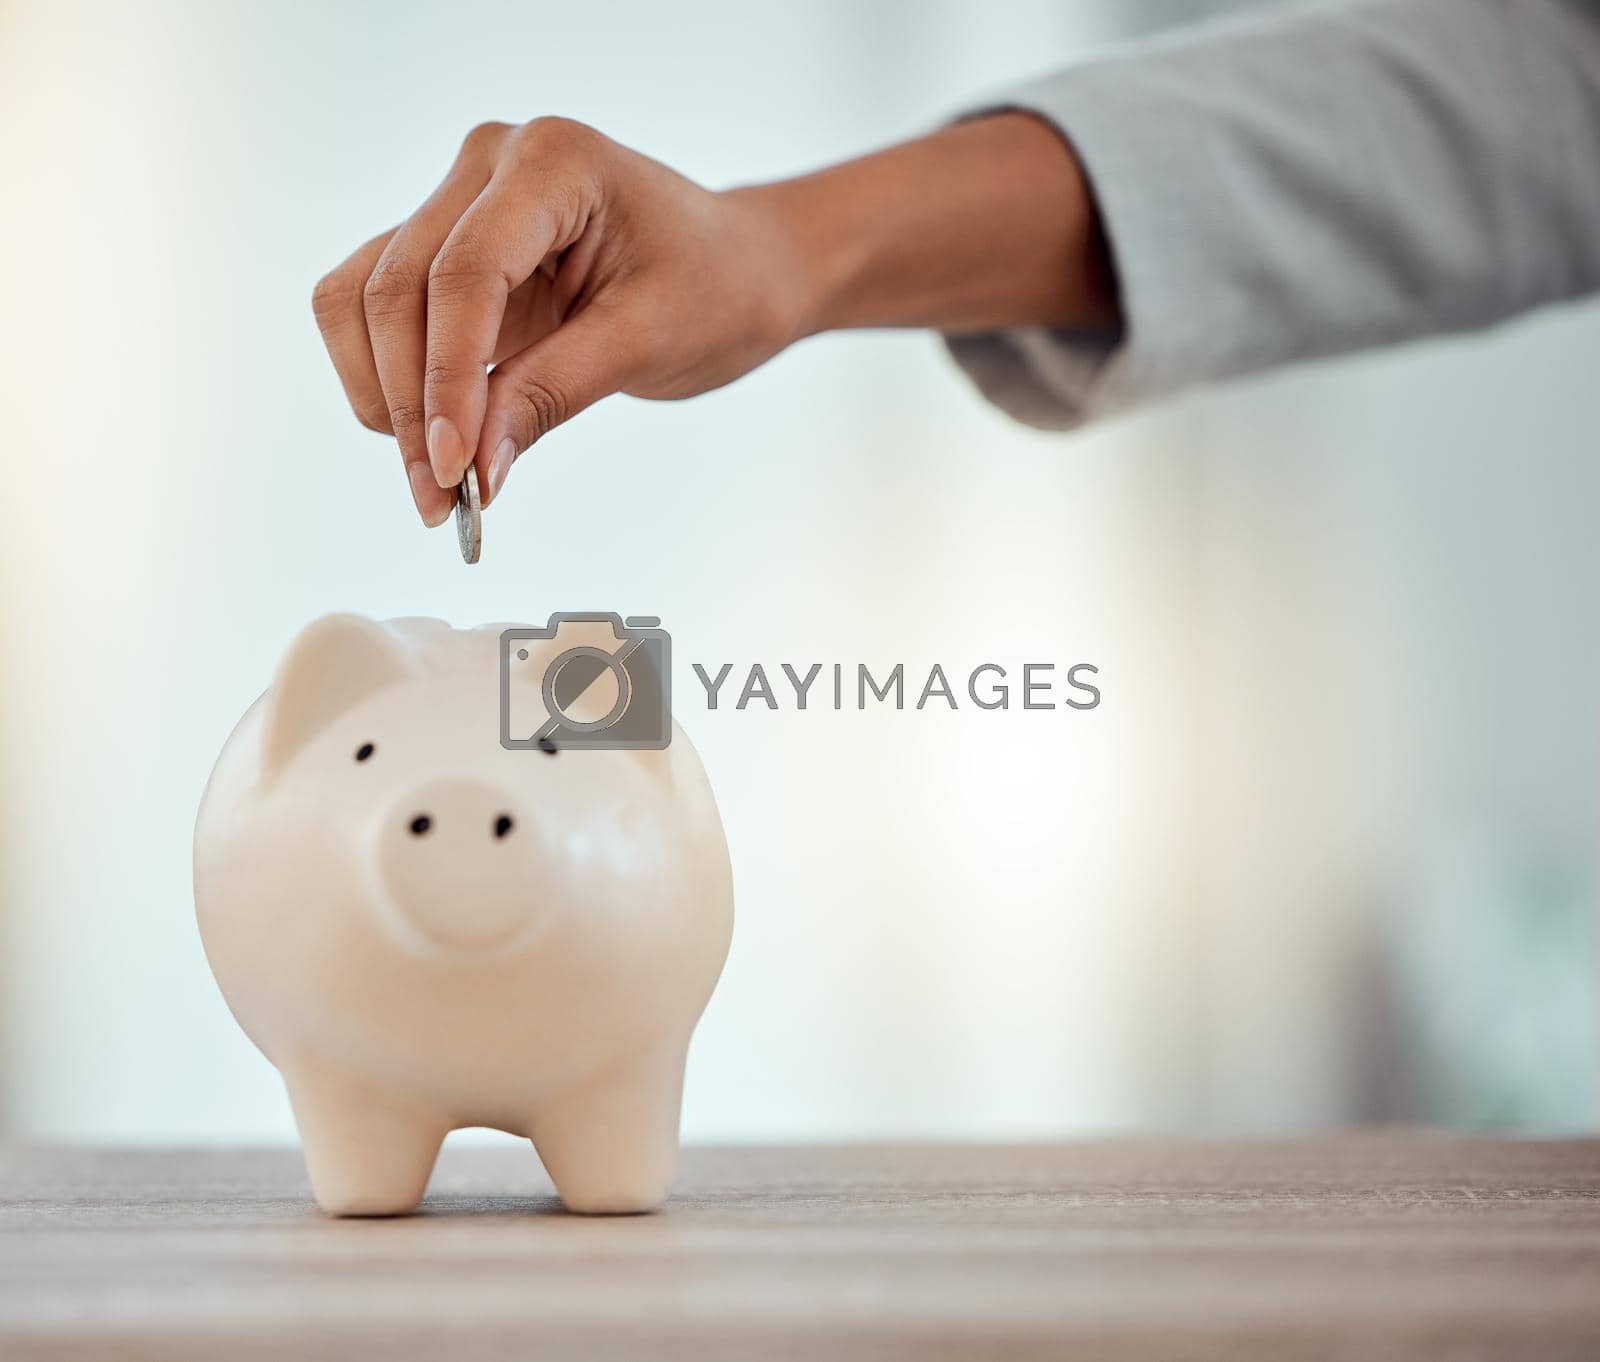 Royalty free image of Savings, investment or hand putting a coin into a piggy bank to save for future growth and financial freedom. Closeup of a female hand dropping or investing money into a retirement fund container by YuriArcurs